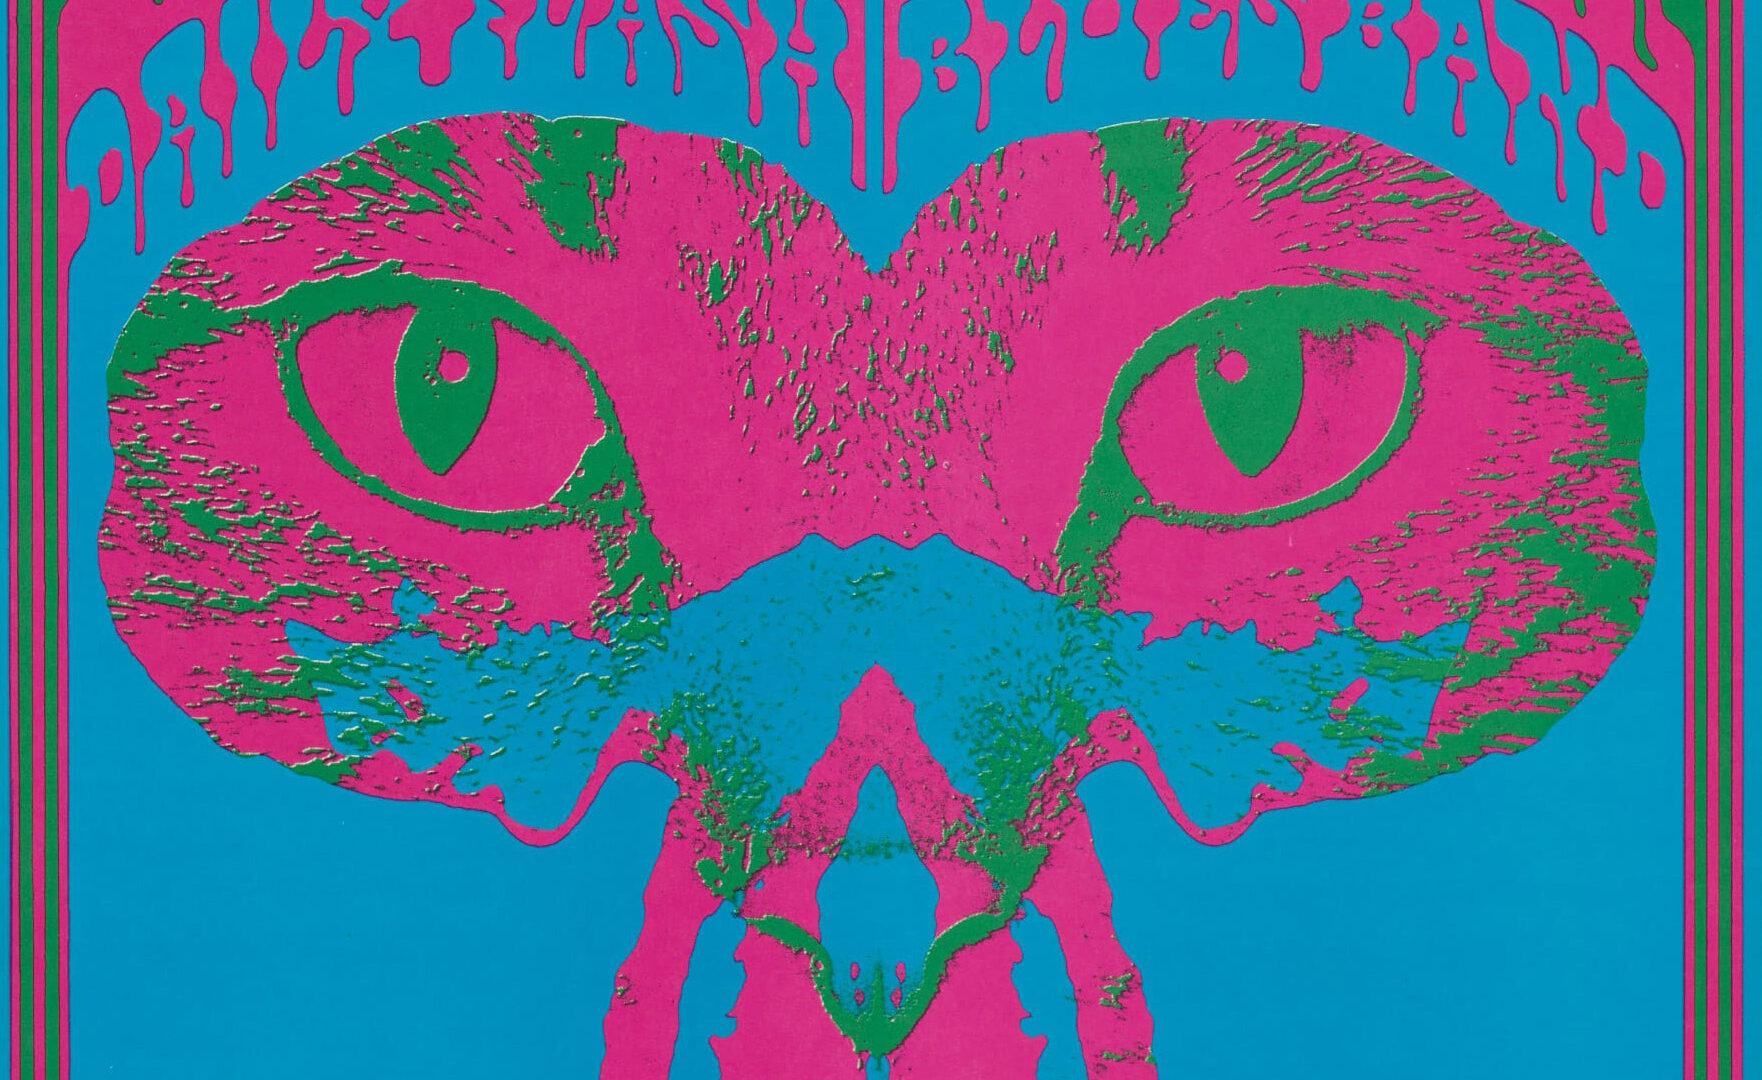 Psychedelic Rock Posters and Fashion of the 1960s - Portland Art Museum